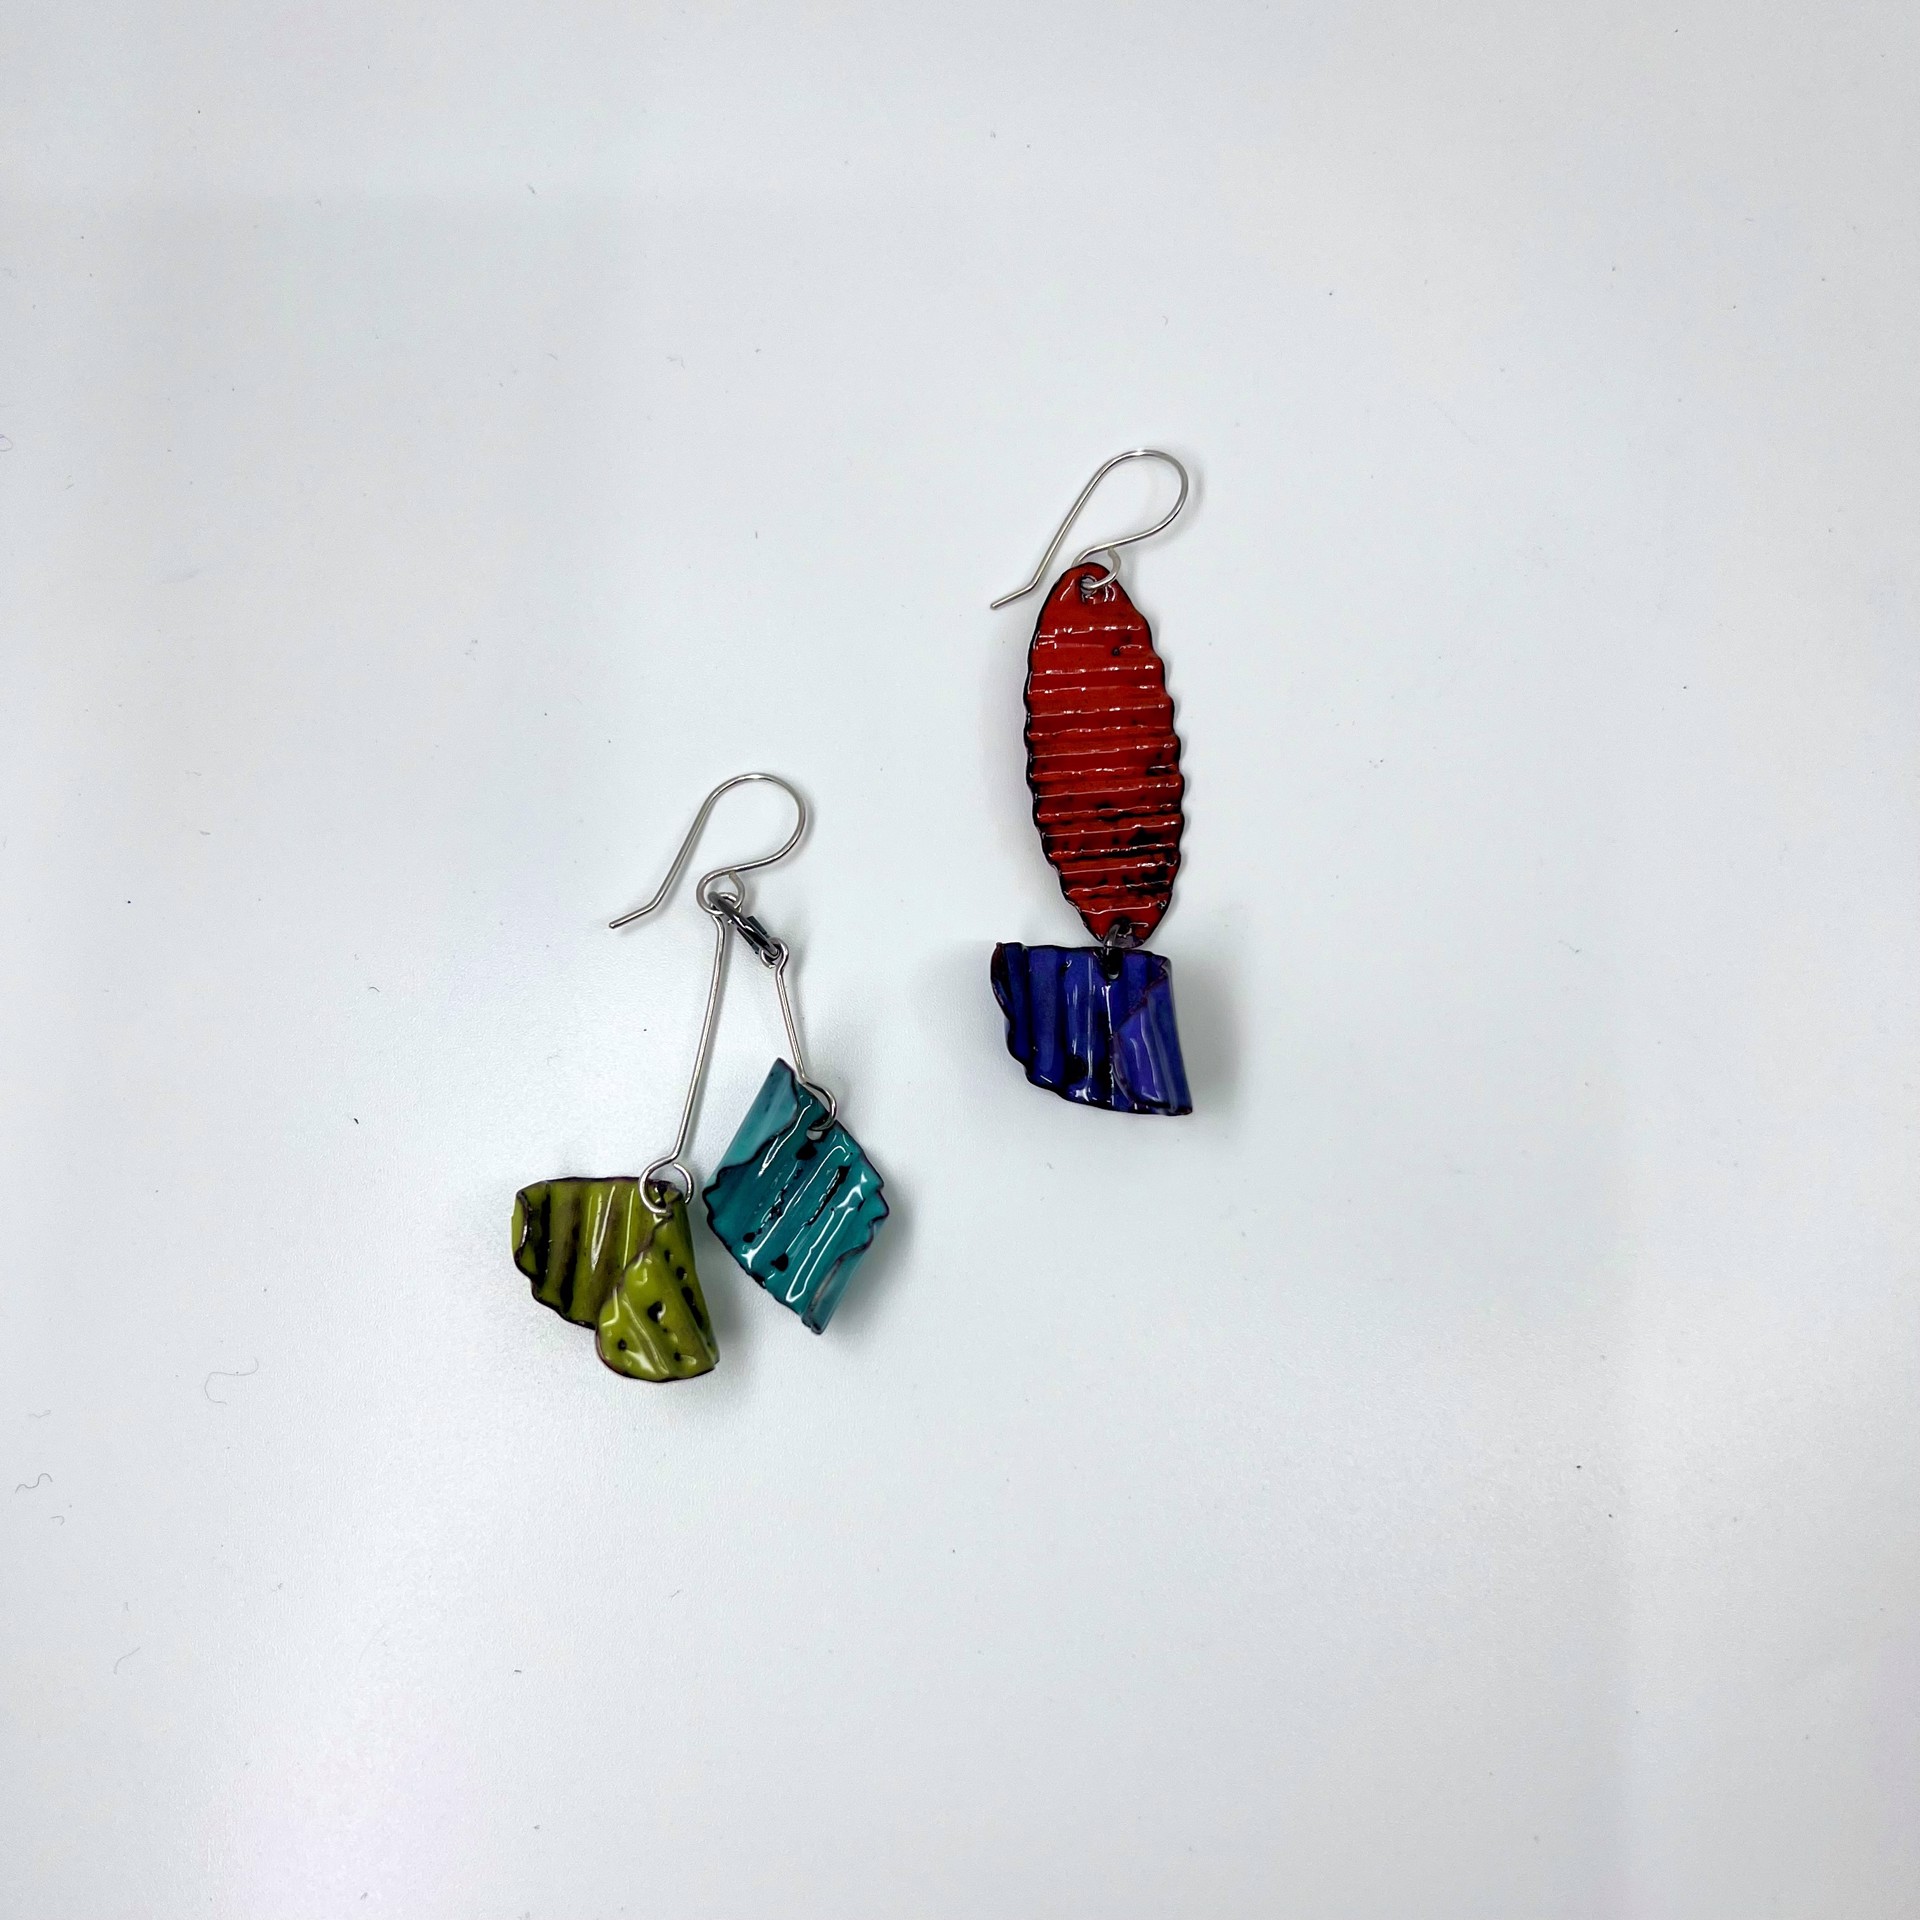 8332 Twirl Earrings (50% Off Listed Price) by Just Kenzie